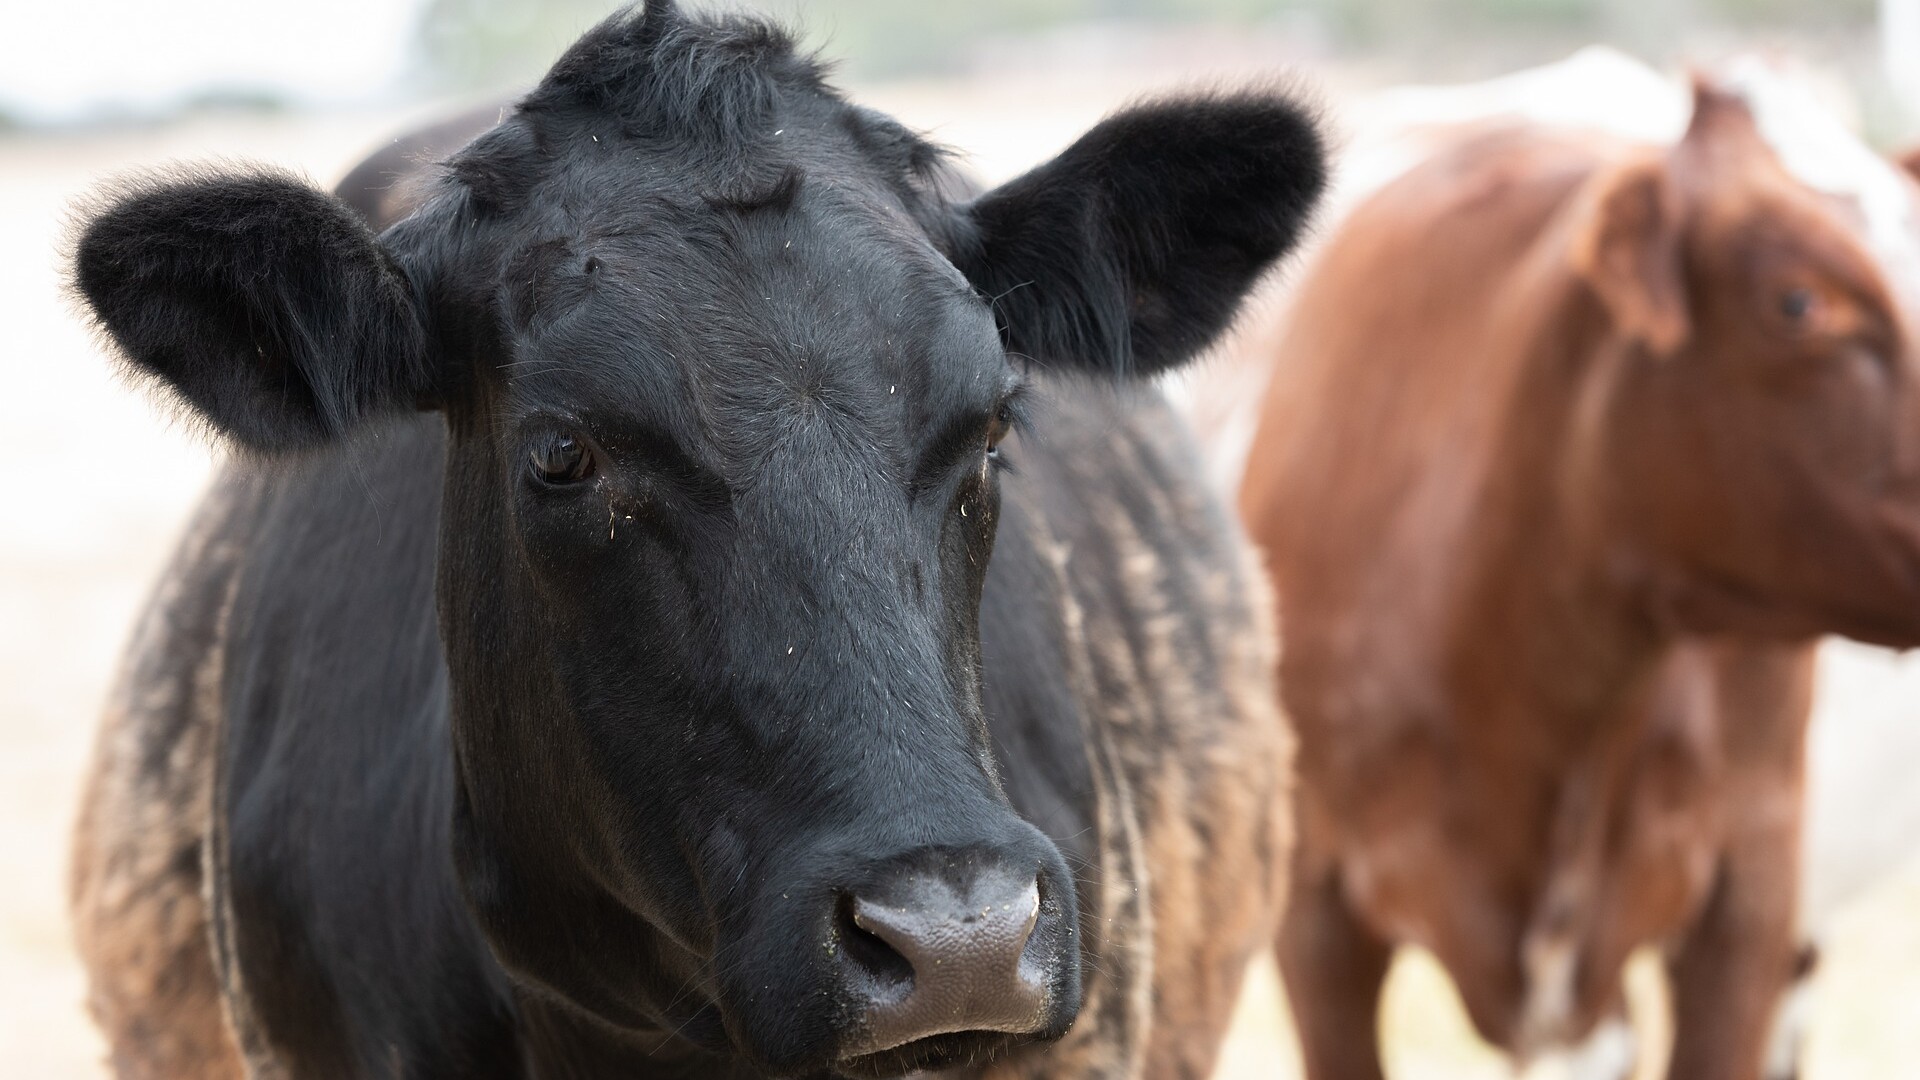 Indo-Pacific Deal Could Open New Markets for CA Cattle